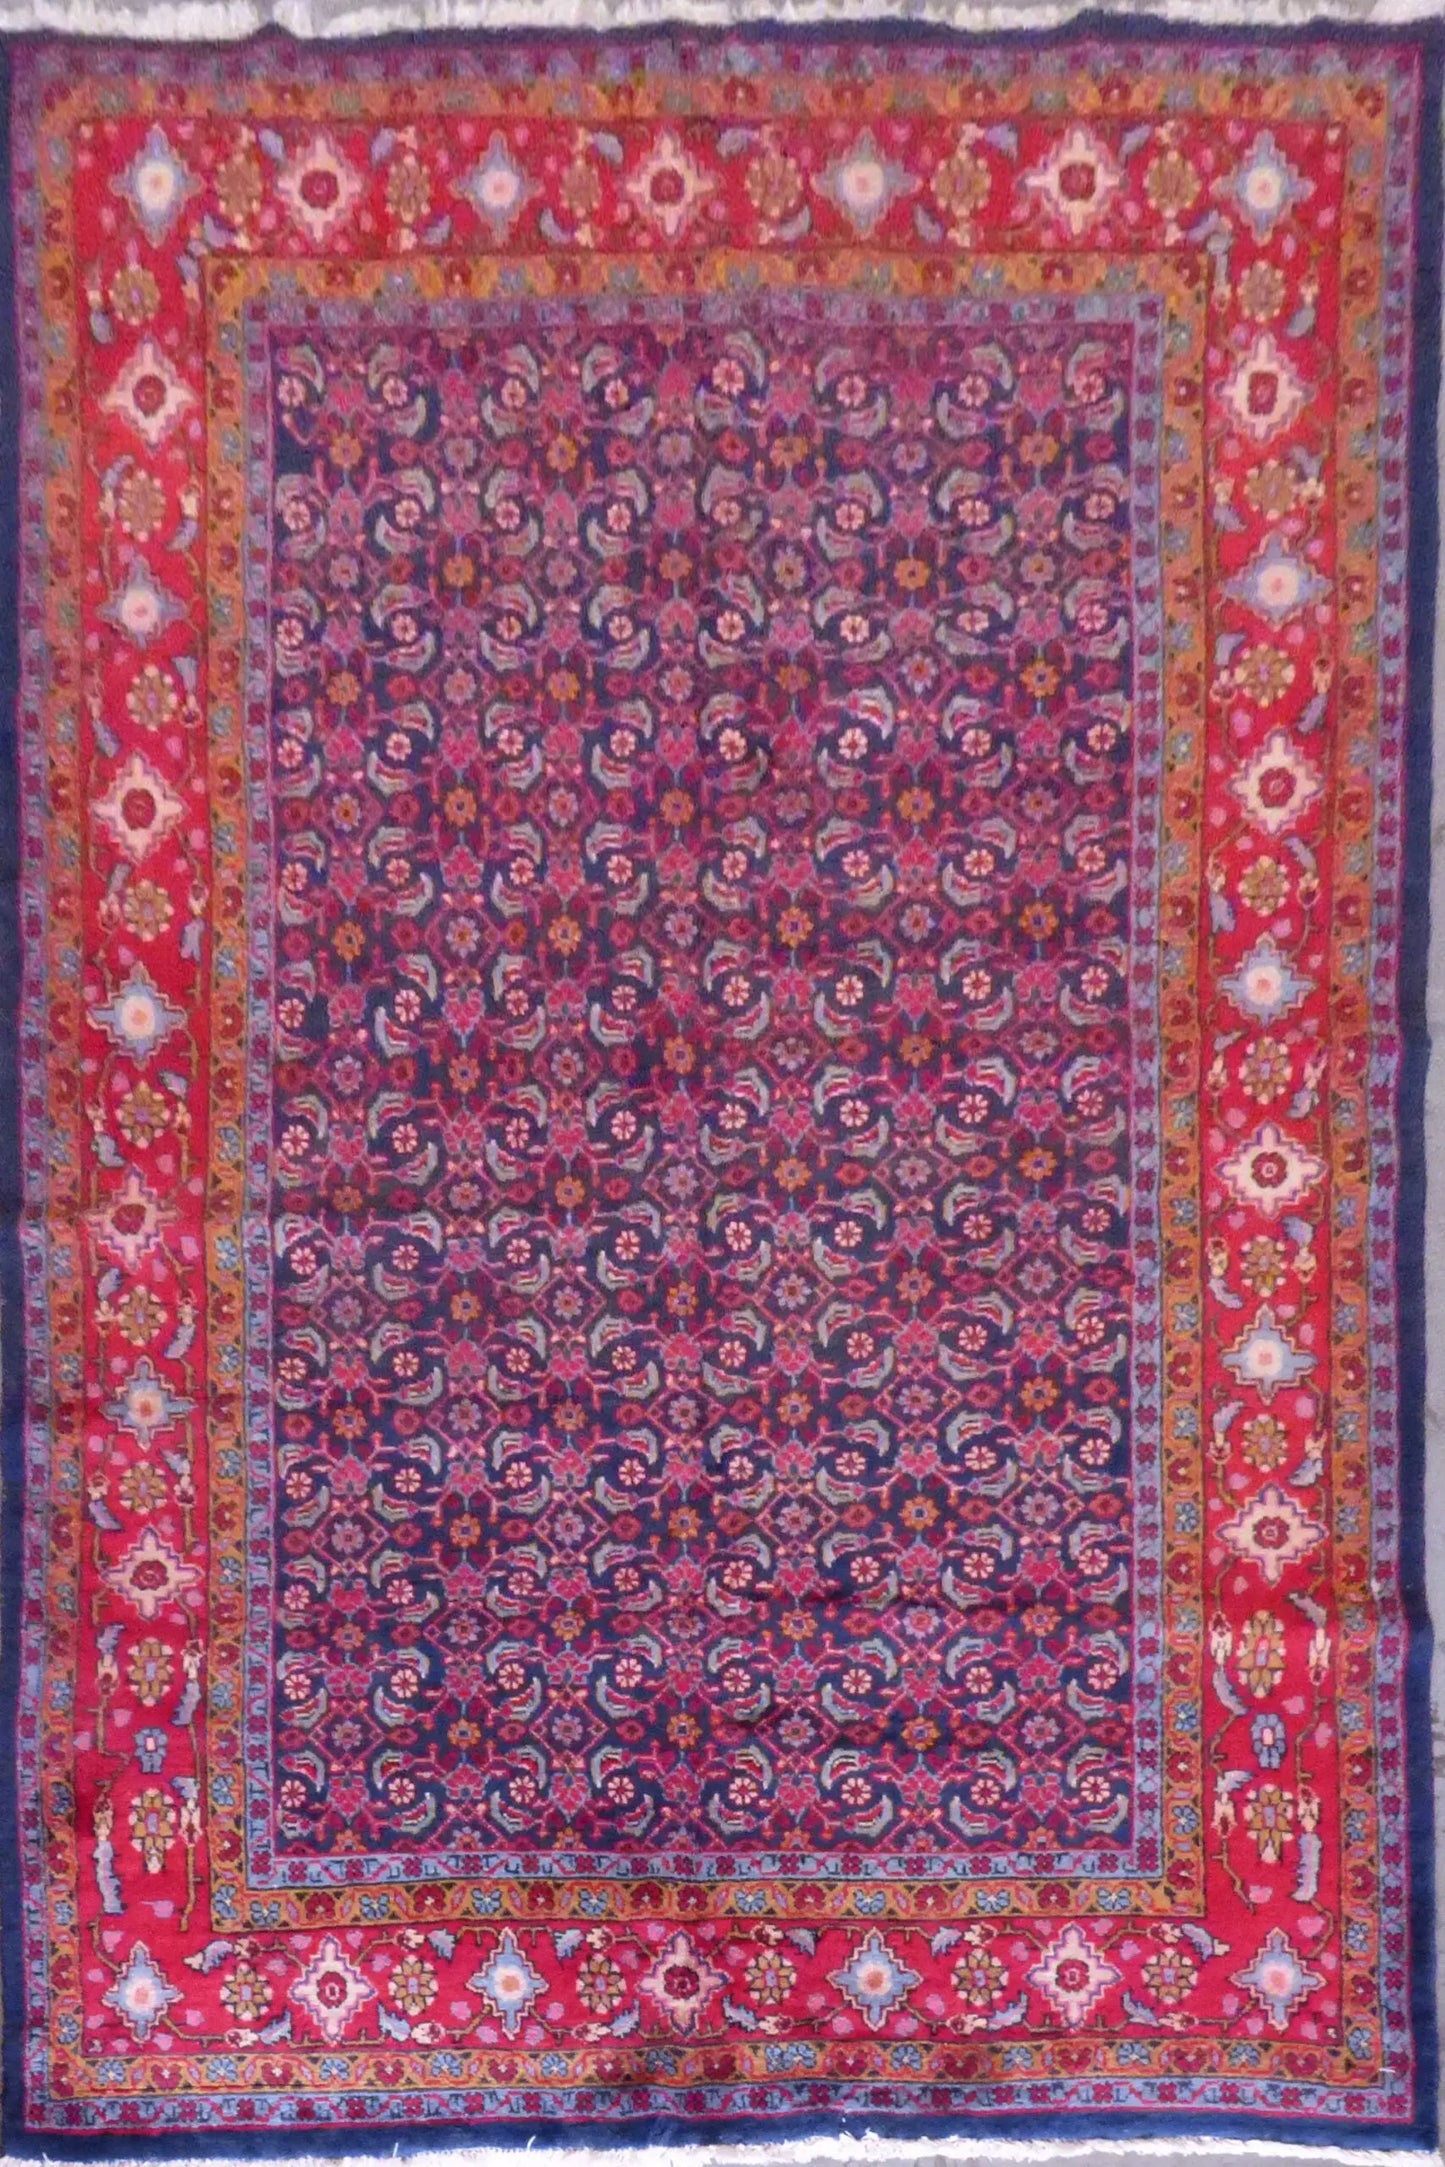 Hand-Knotted Persian Wool Rug _ Luxurious Vintage Design, 10'7" x 7', Artisan Crafted